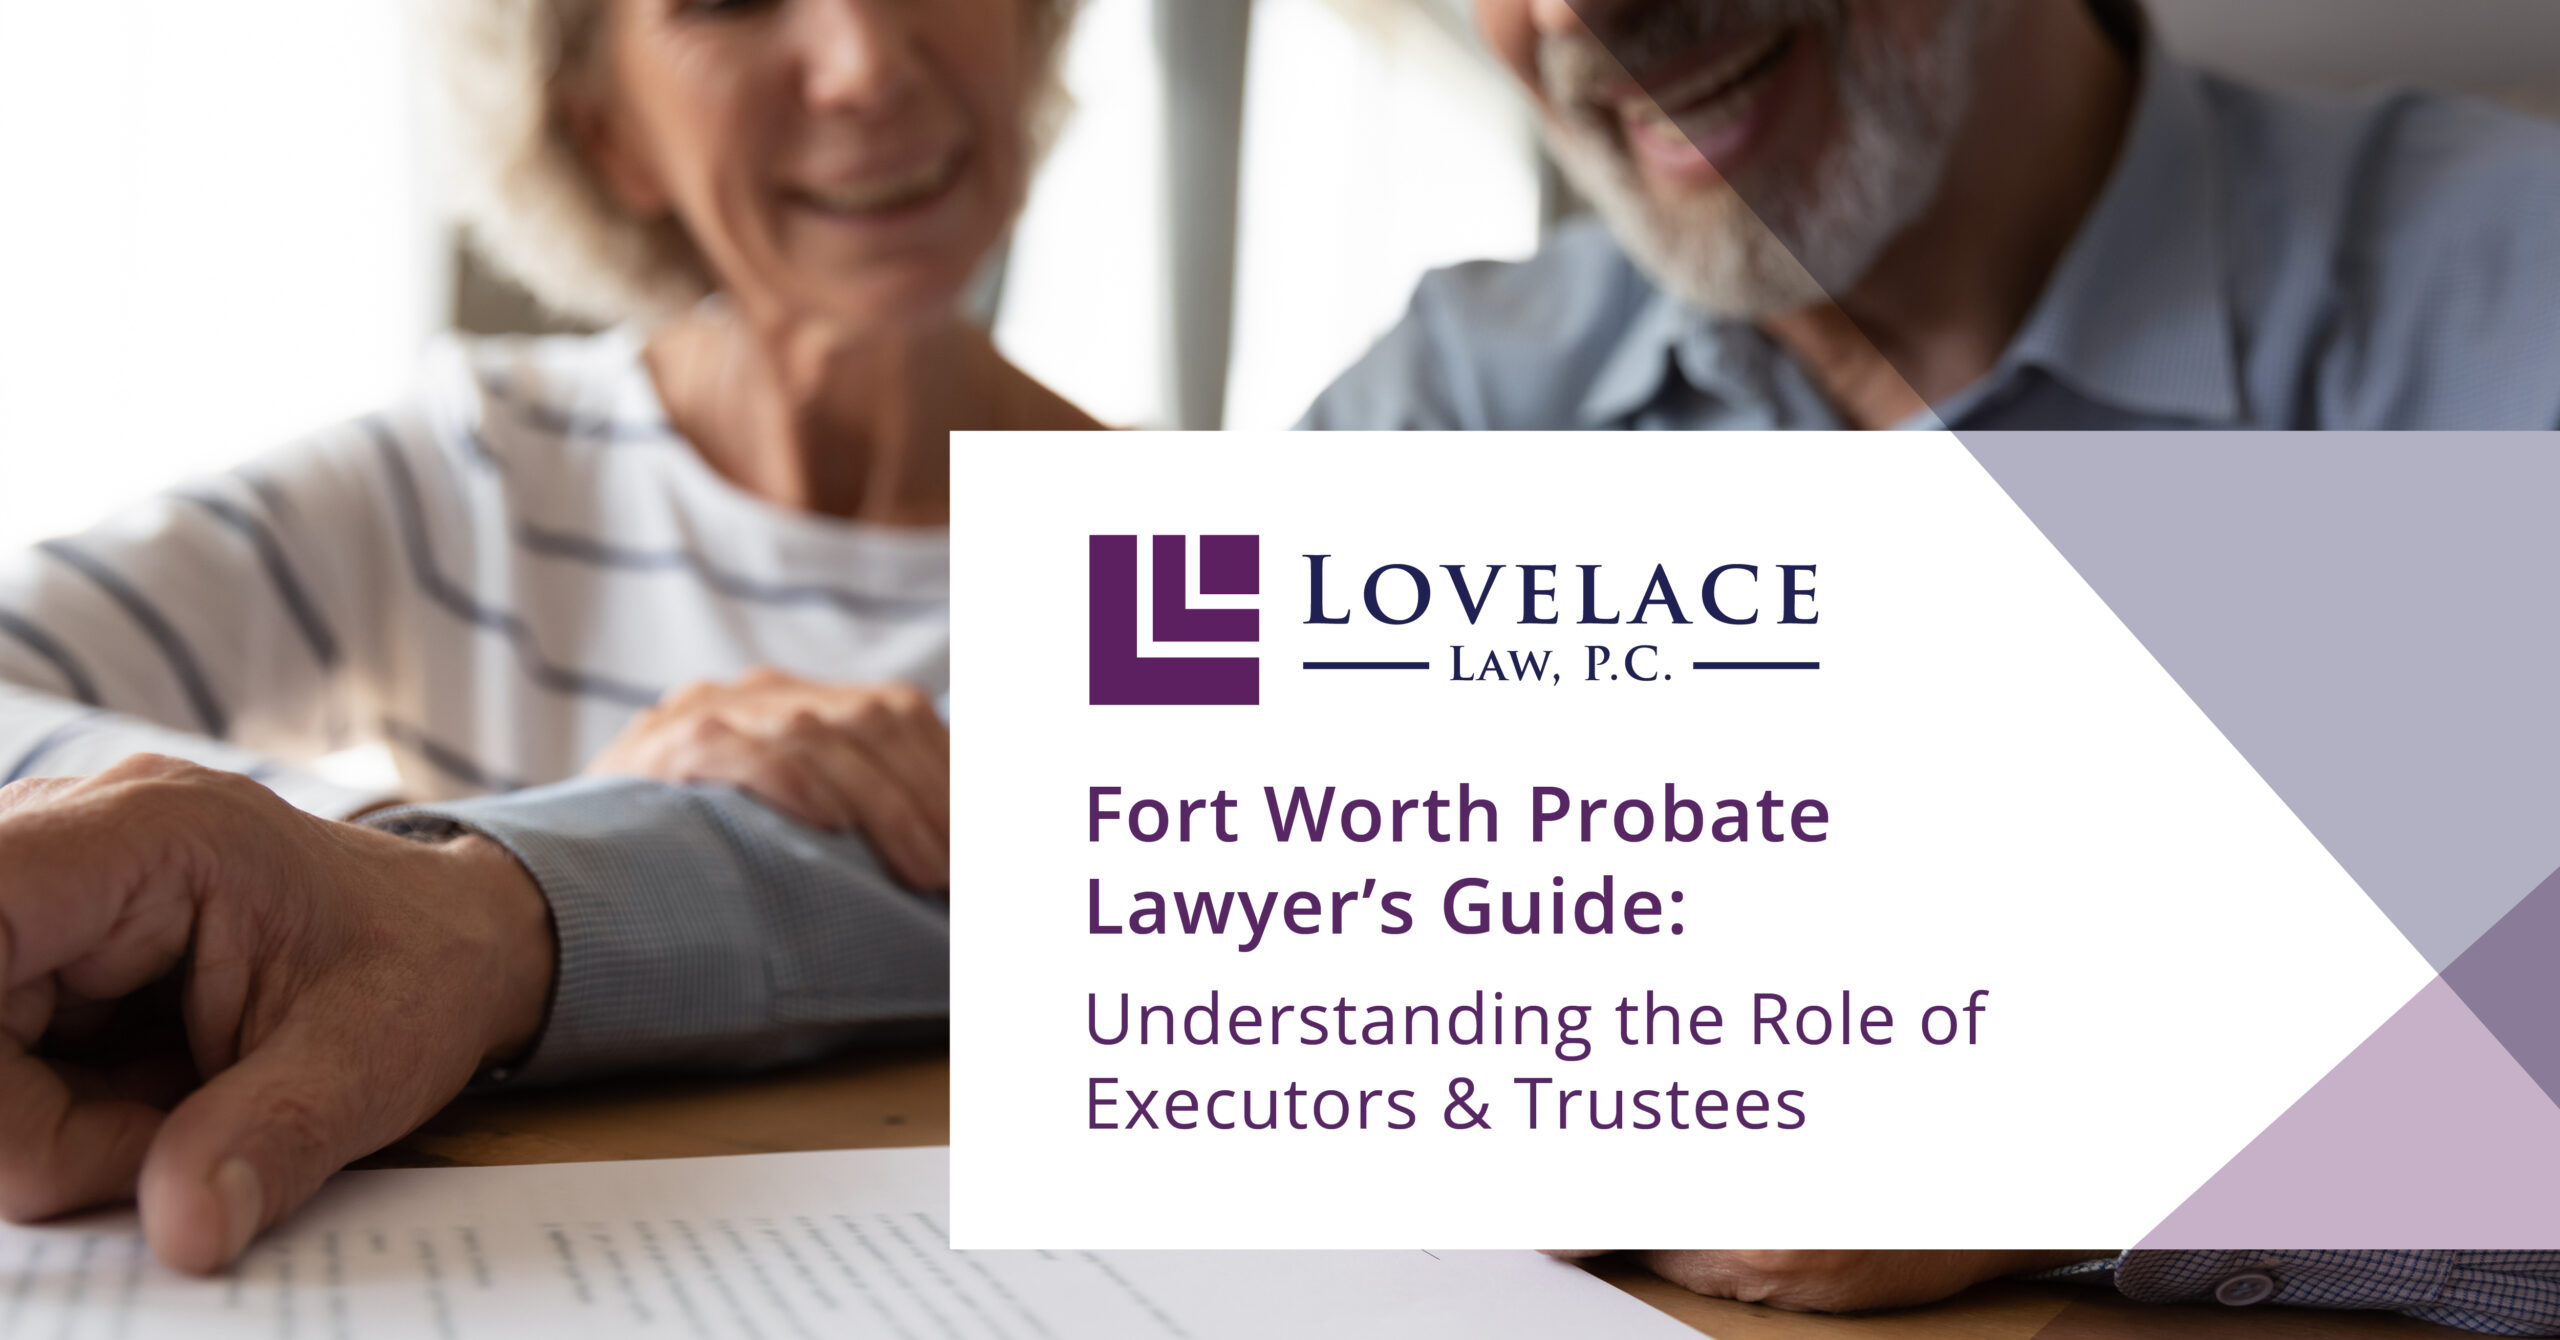 Fort Worth Probate Lawyer